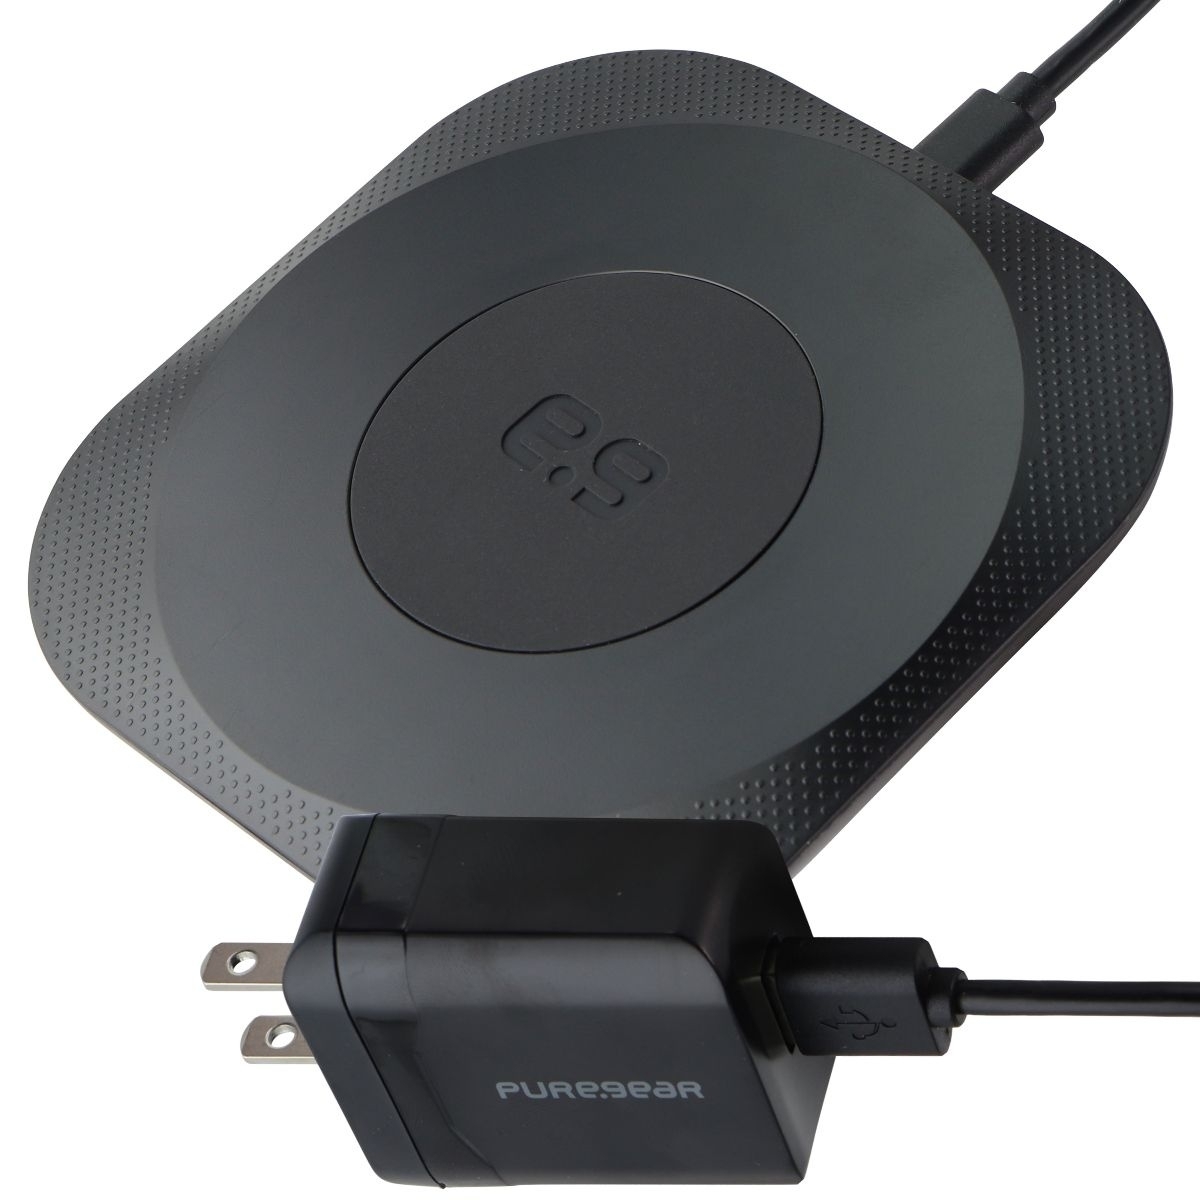 Pure Gear 15W Wireless Charging Pad For Qi Enabled Devices - Black